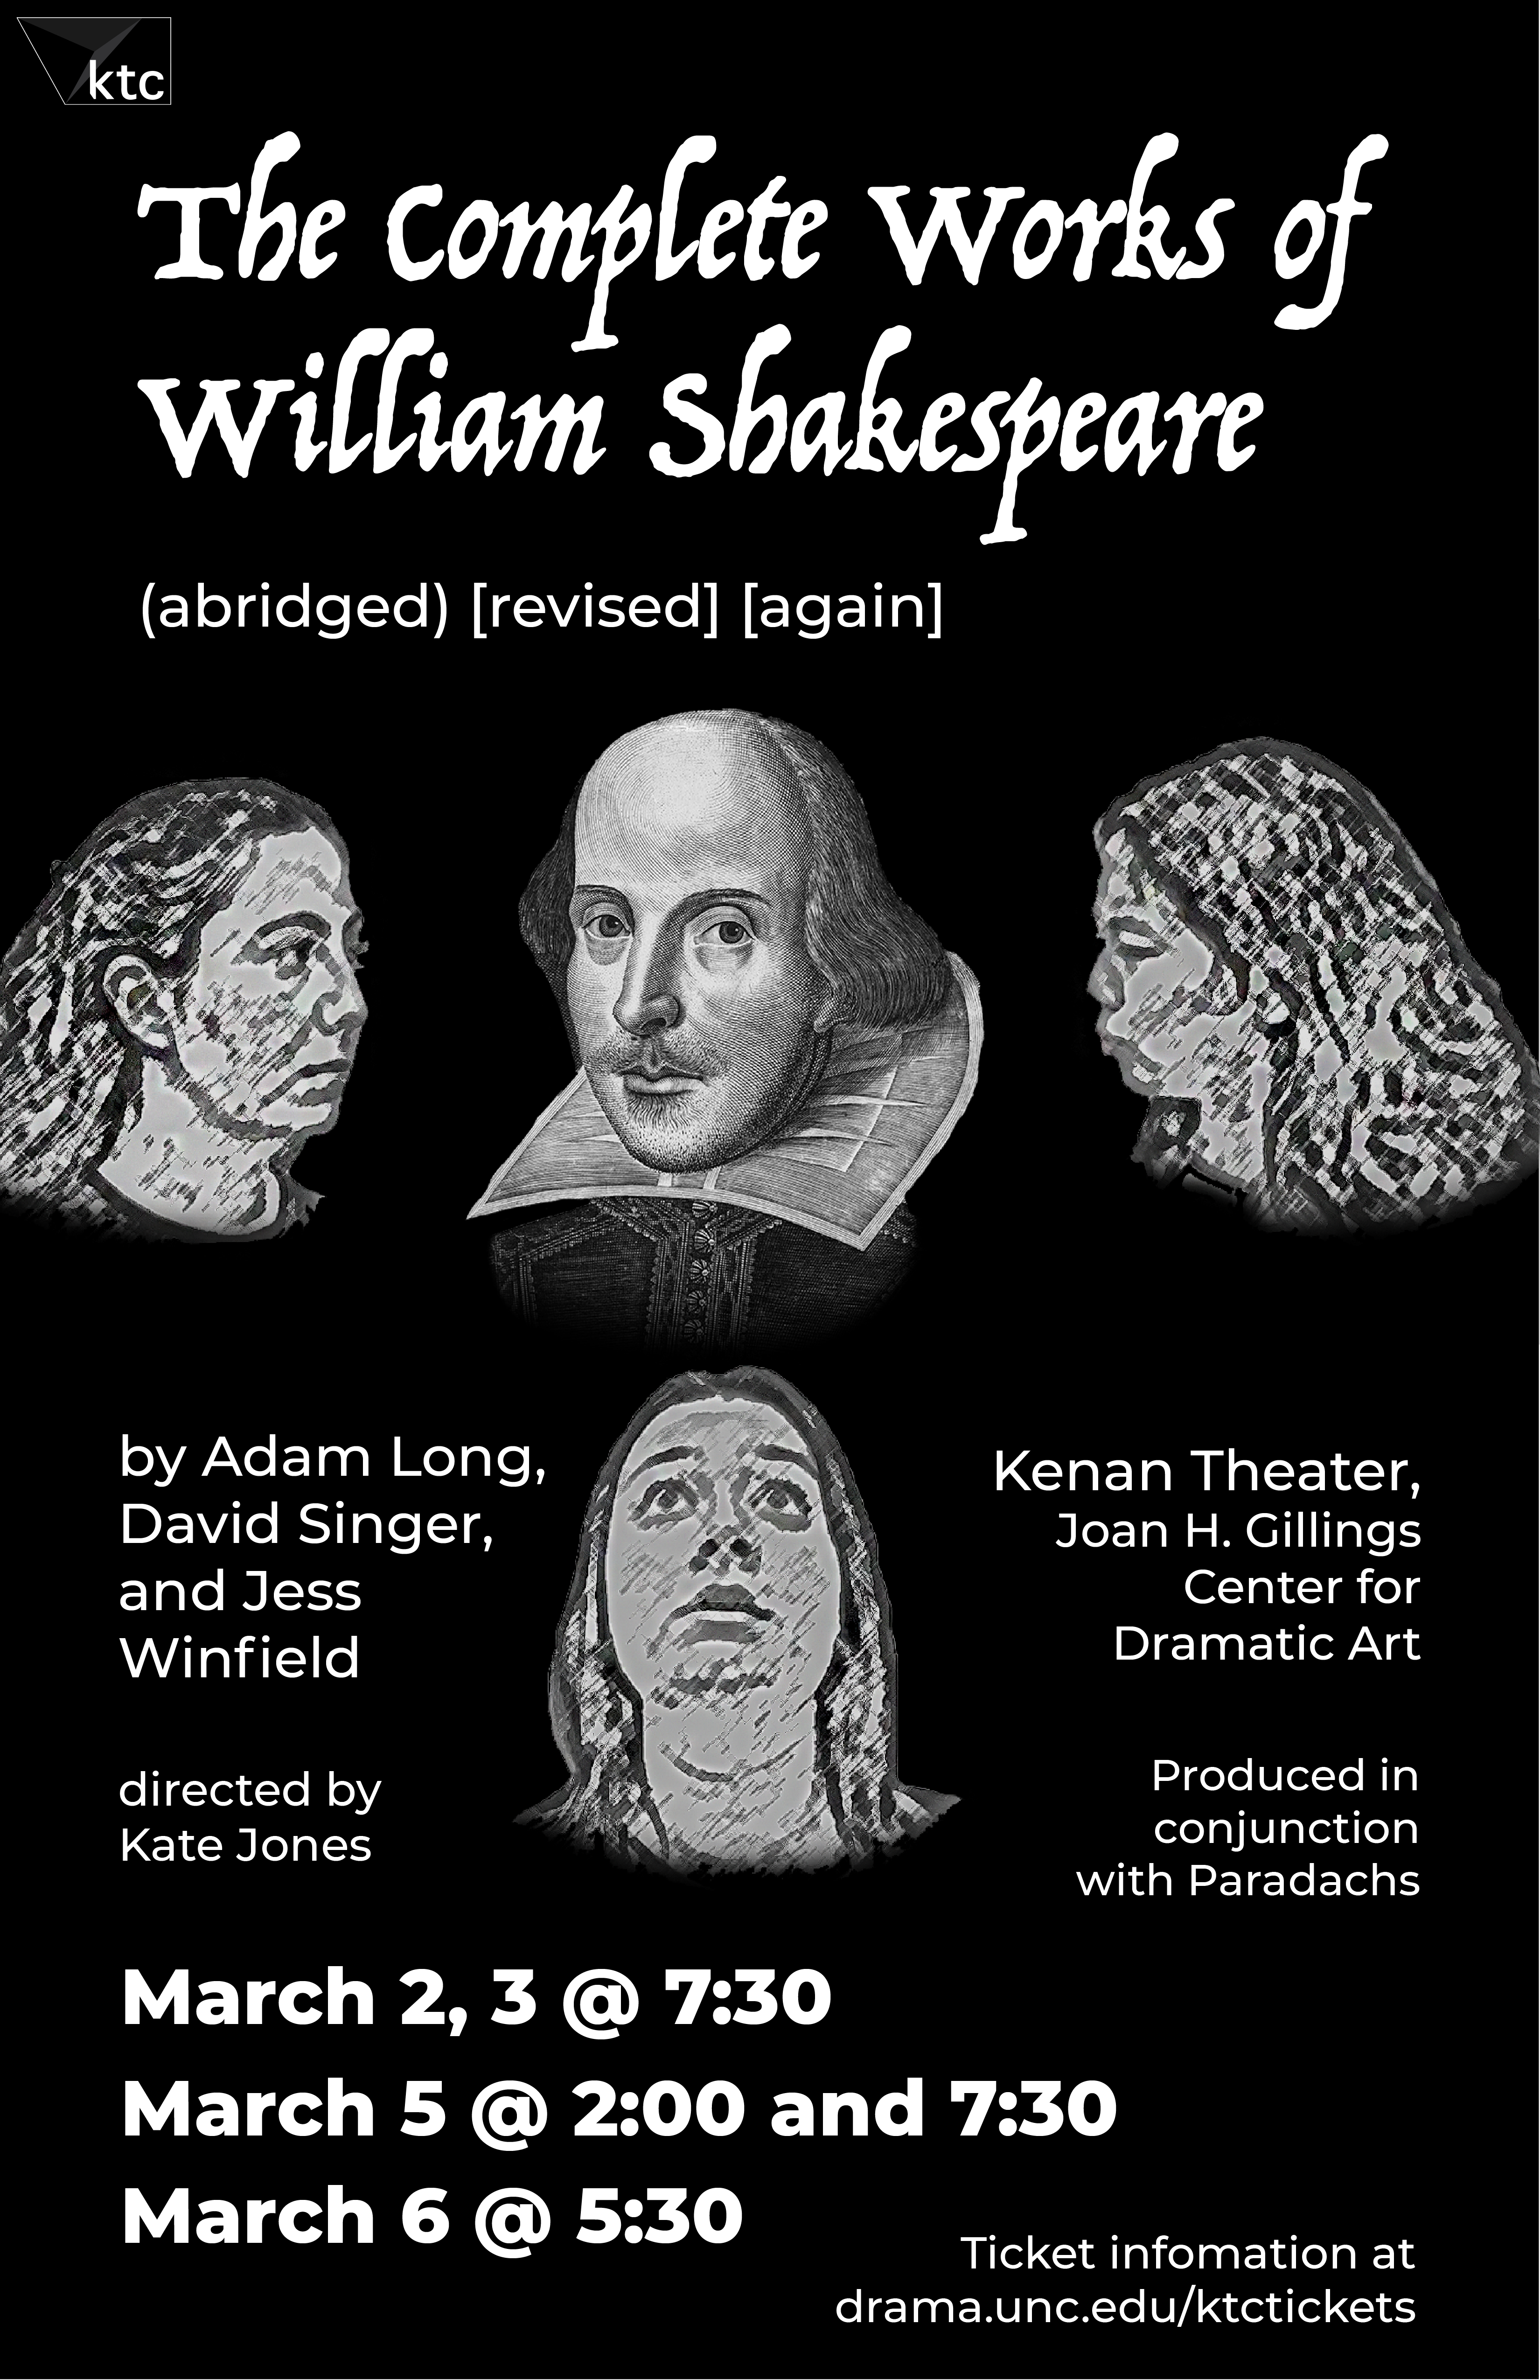 Complete Works of Shakespeare: Abridged, revised, again